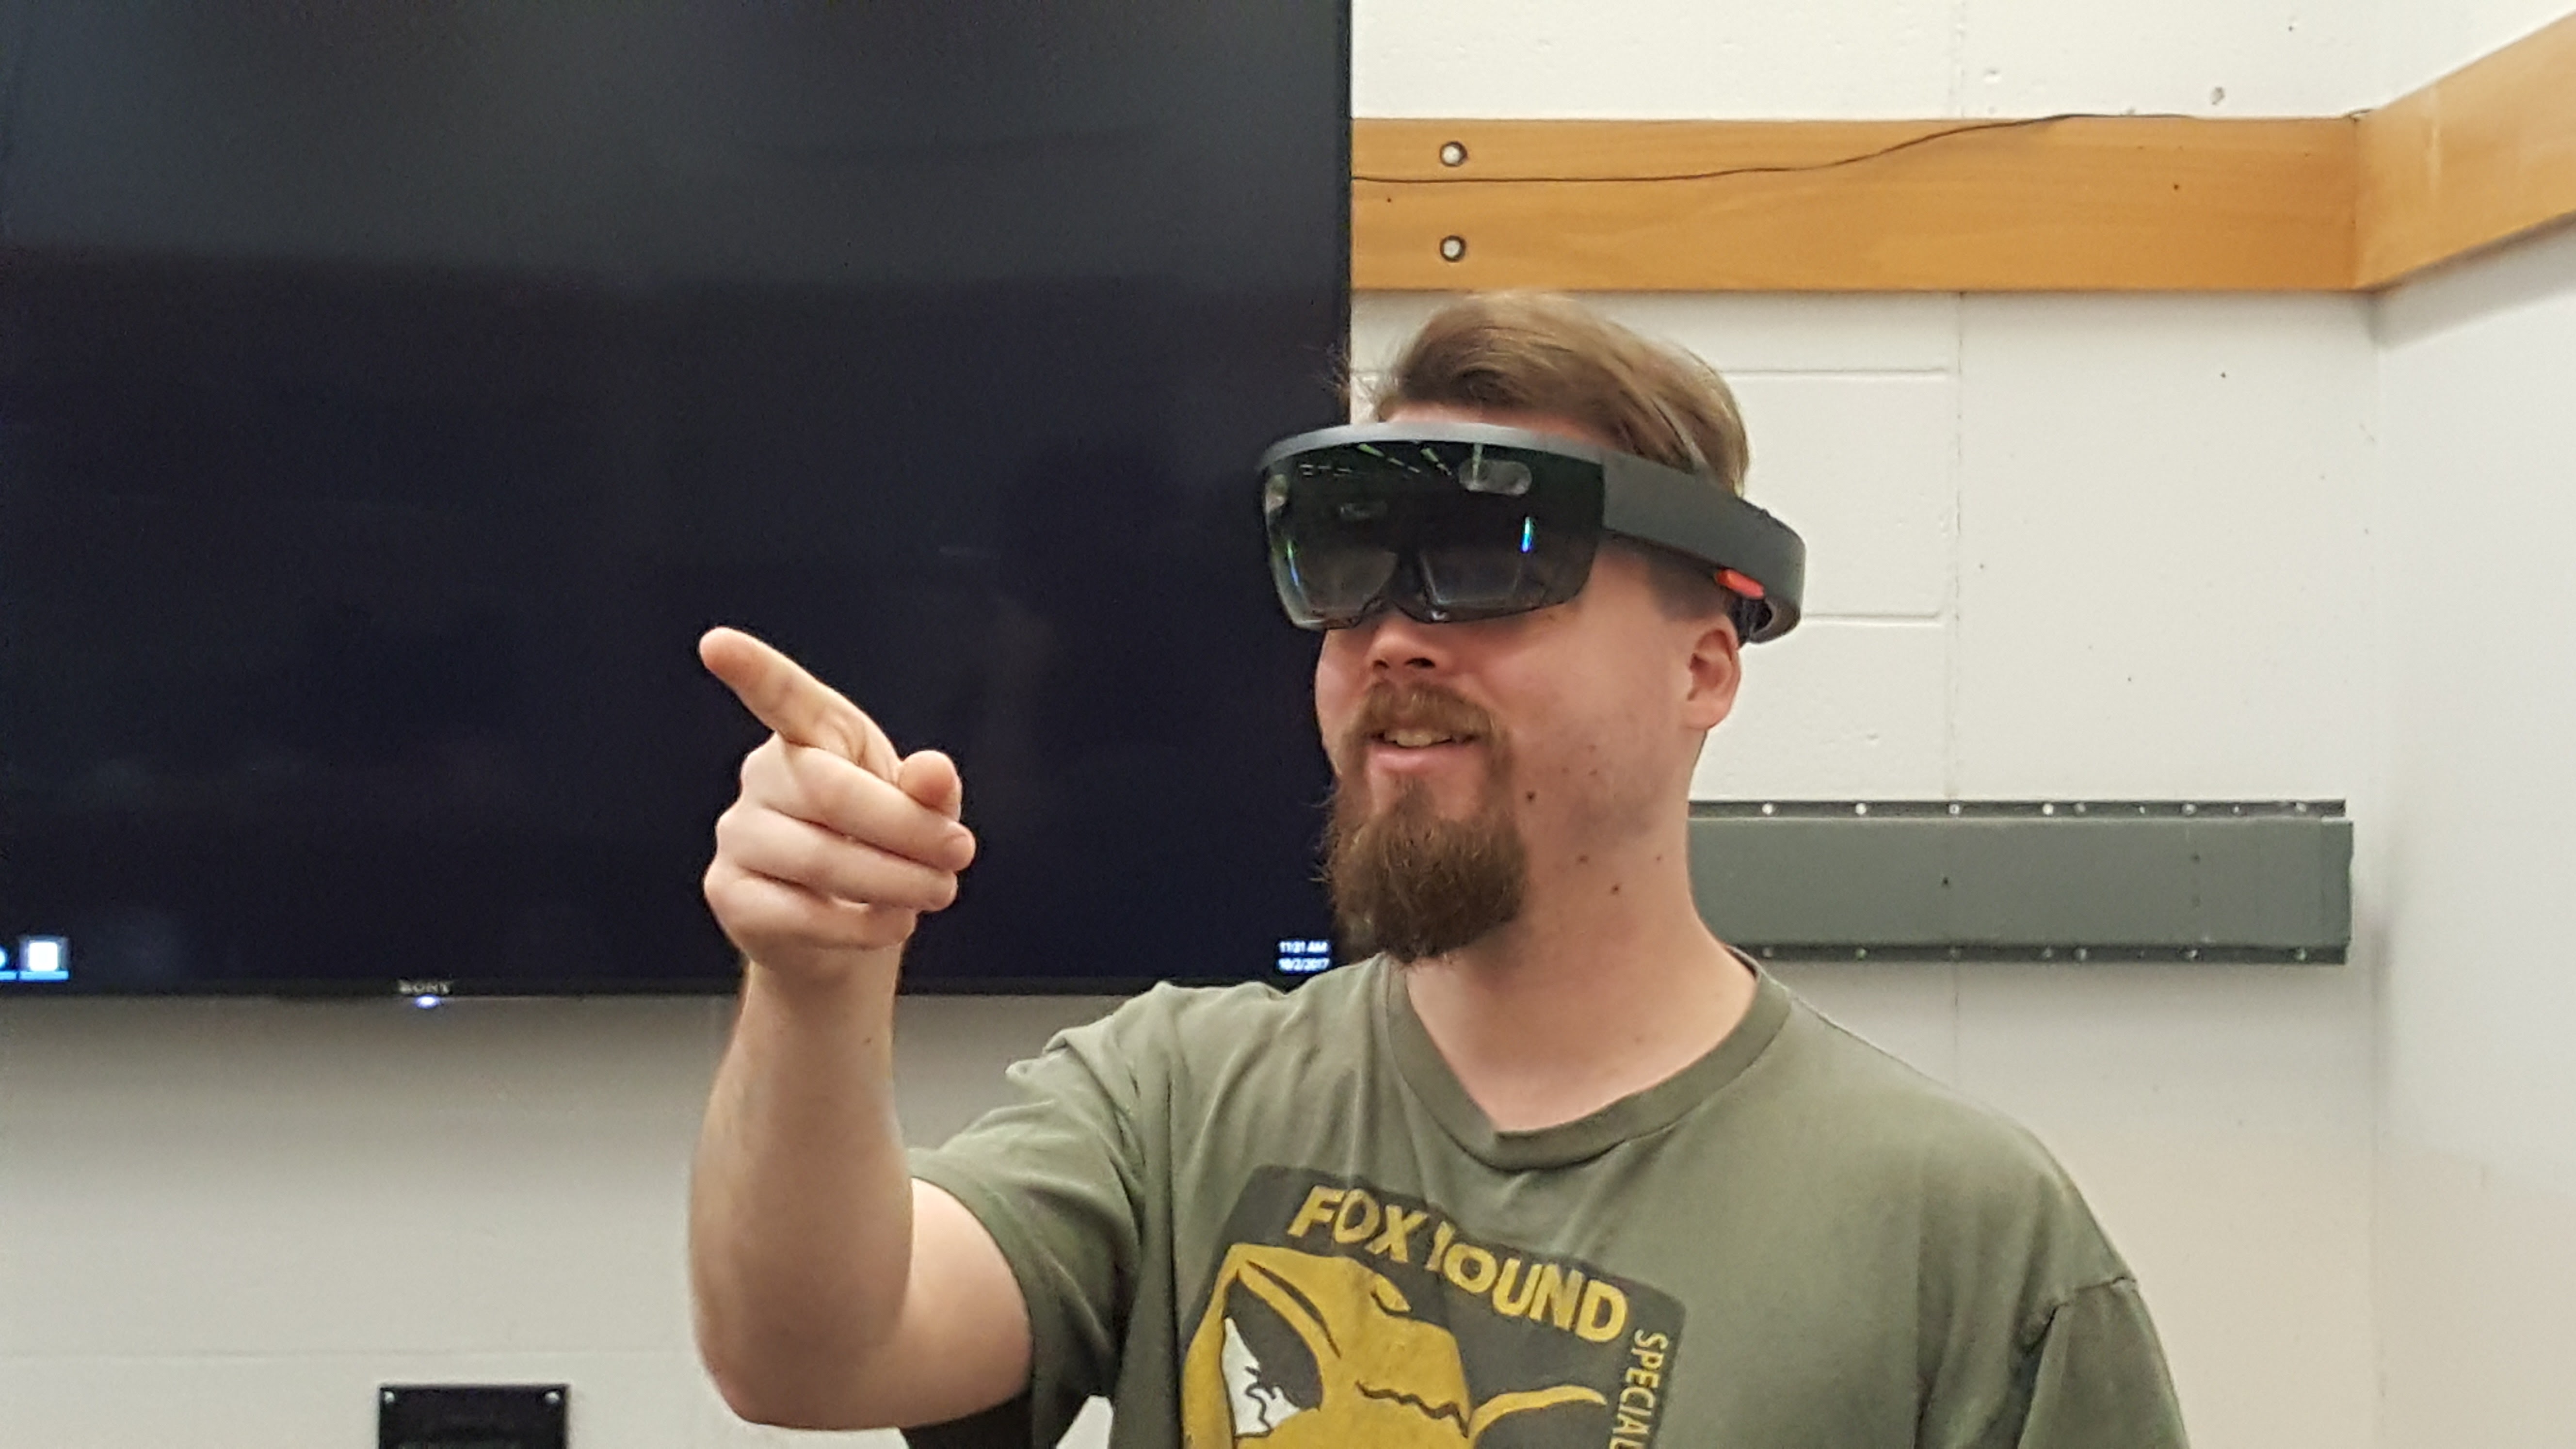 Student Interacting With the Hololens.